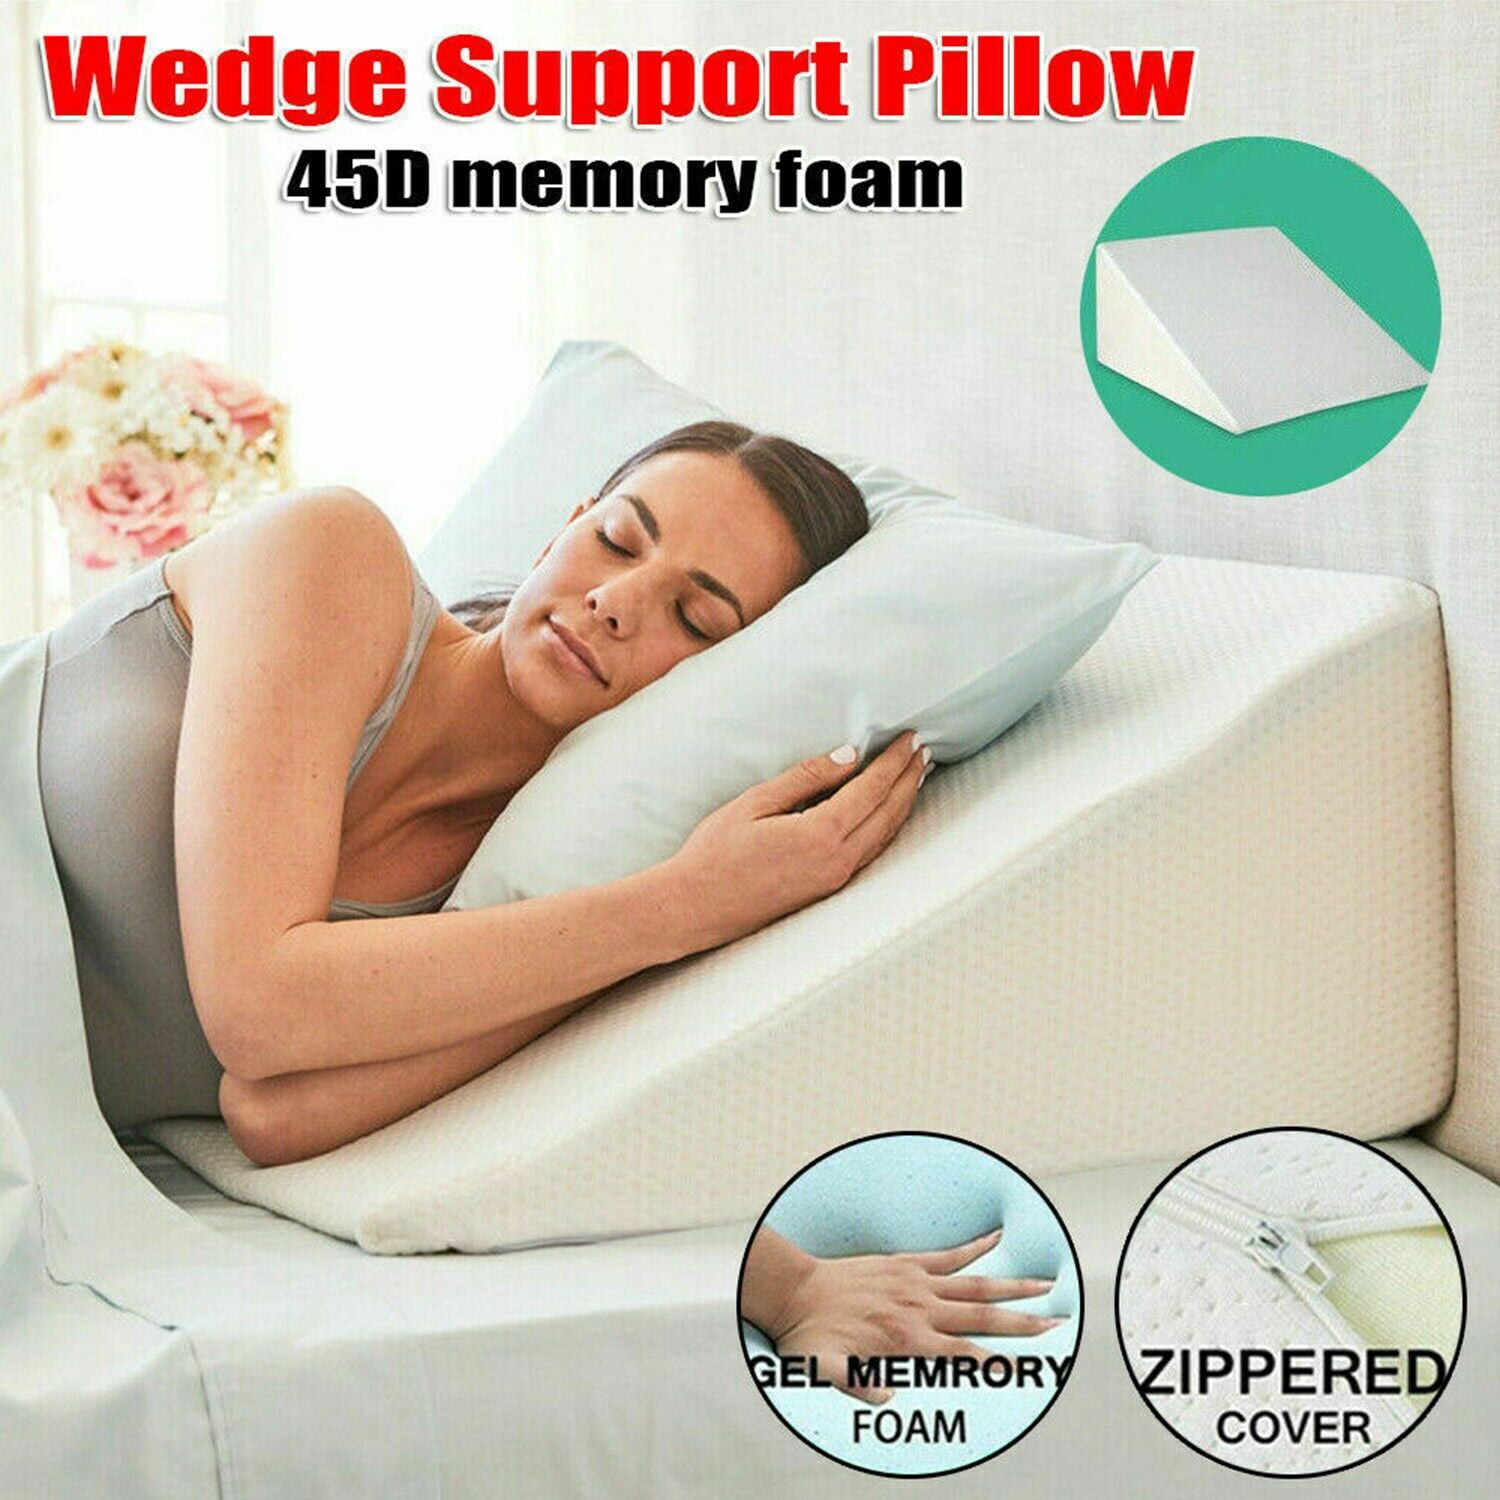 Medical Pillow Wedge Bed Reduce Acid Reflux Memory Foam Comfort Cover 25x24x12 